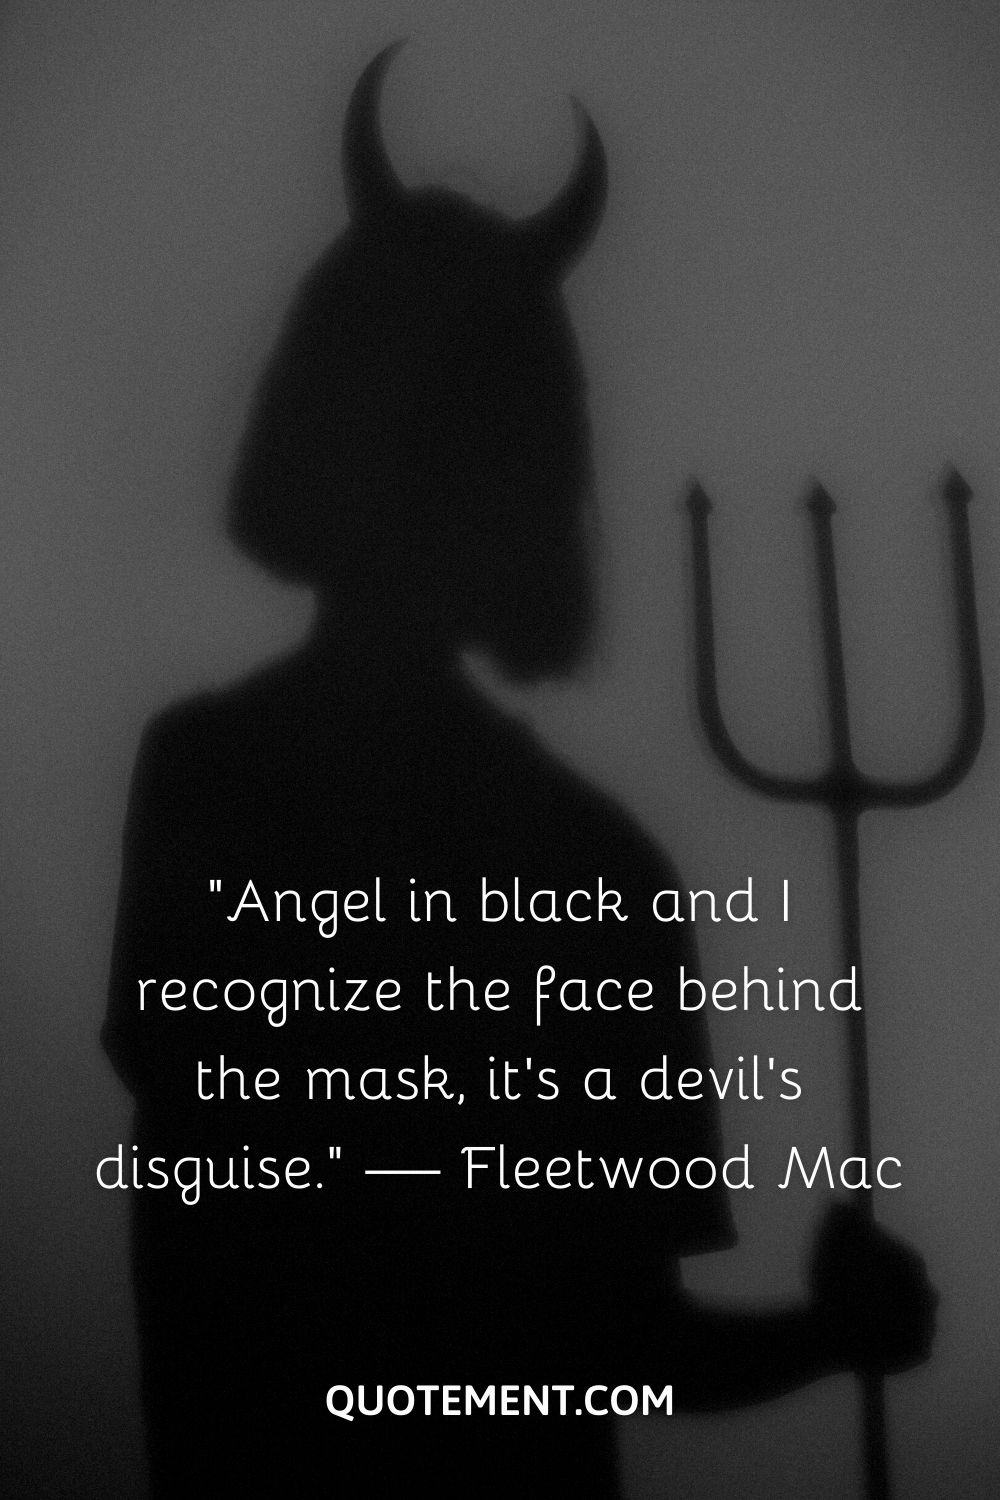 “Angel in black and I recognize the face behind the mask, it’s a devil’s disguise.” — Fleetwood Mac